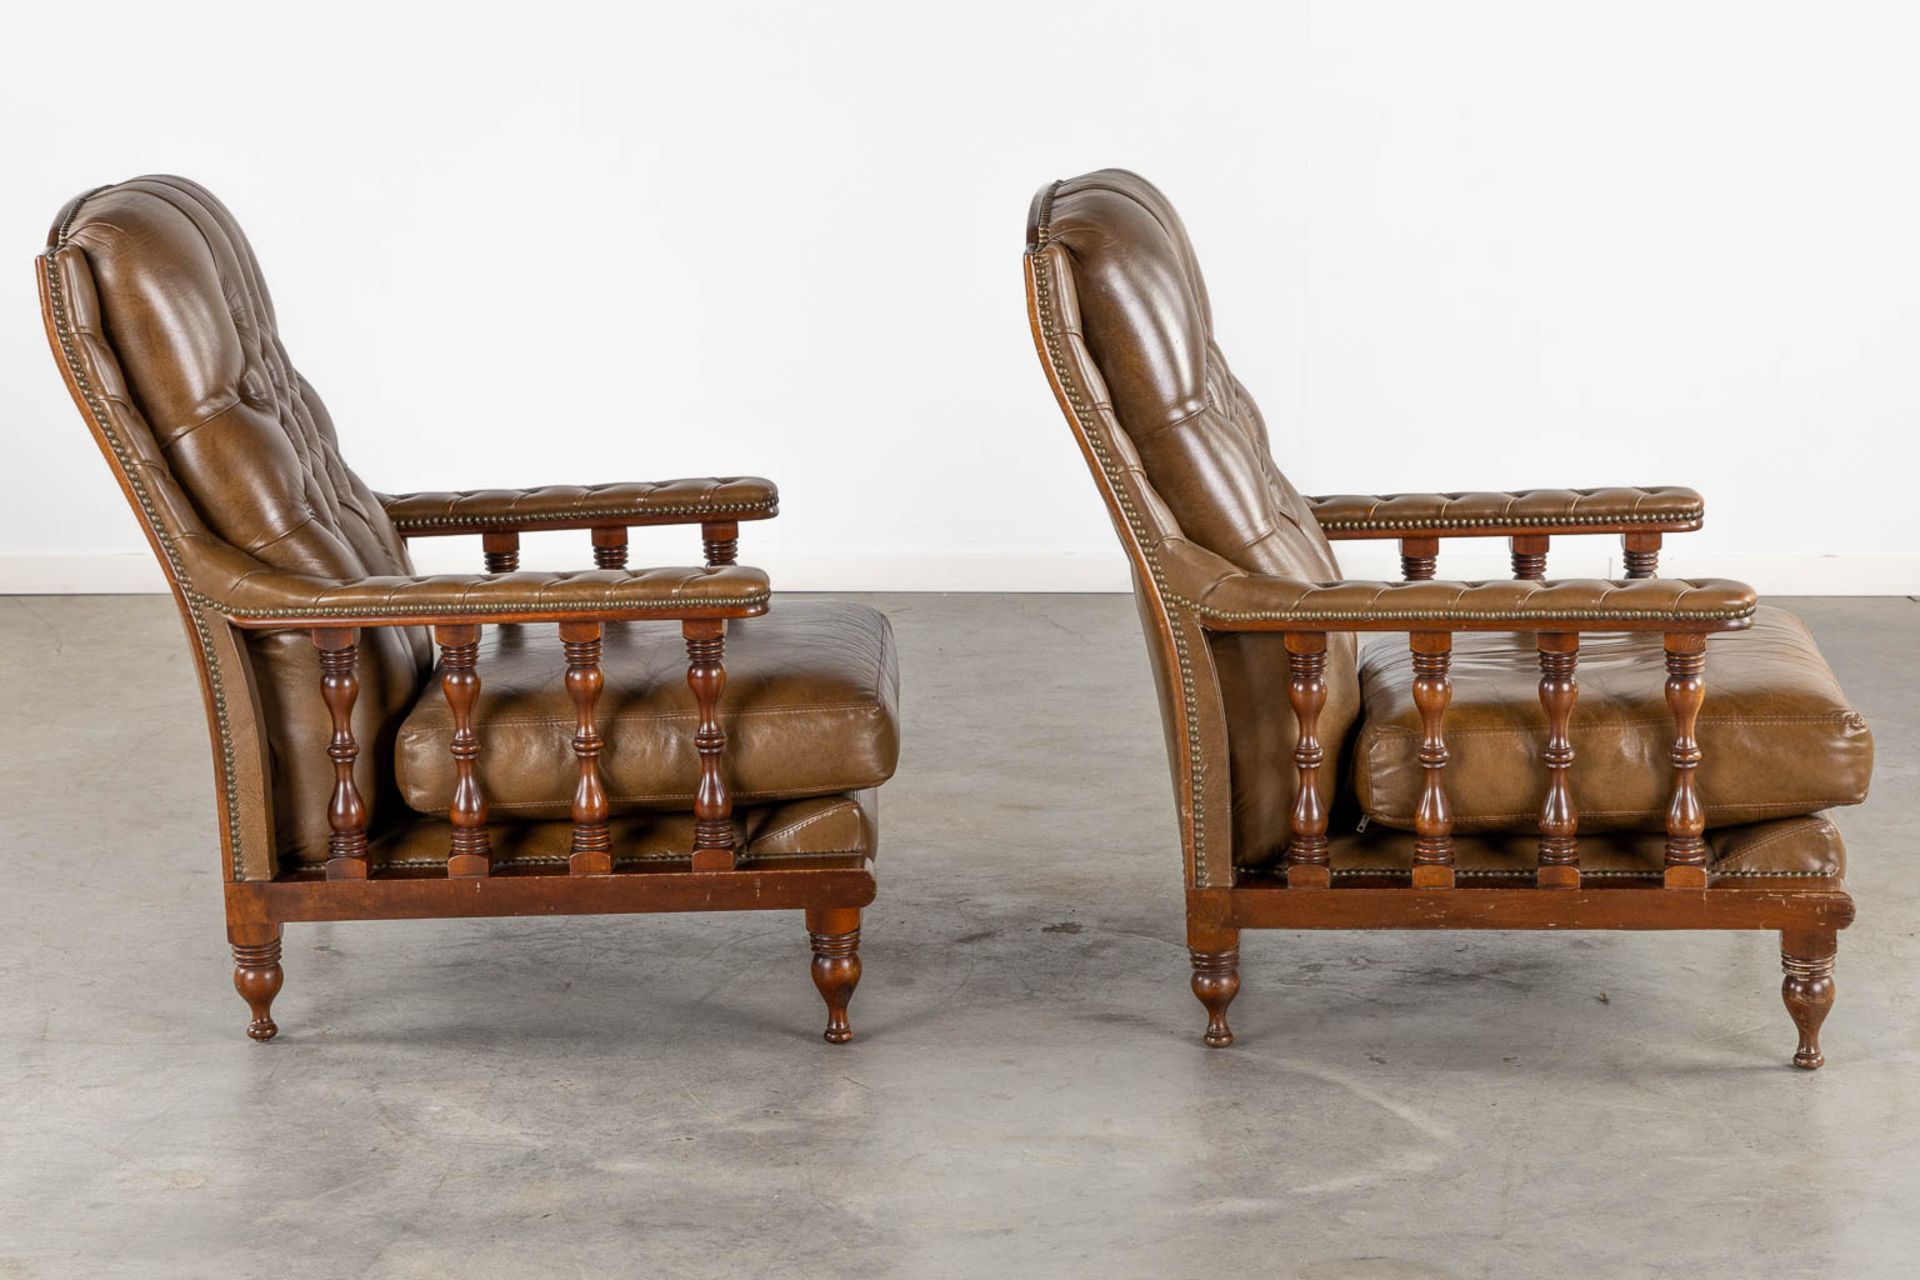 A pair of relax chairs, leather and wood in Chesterfield style. (L:83 x W:74 x H:95 cm) - Bild 6 aus 11